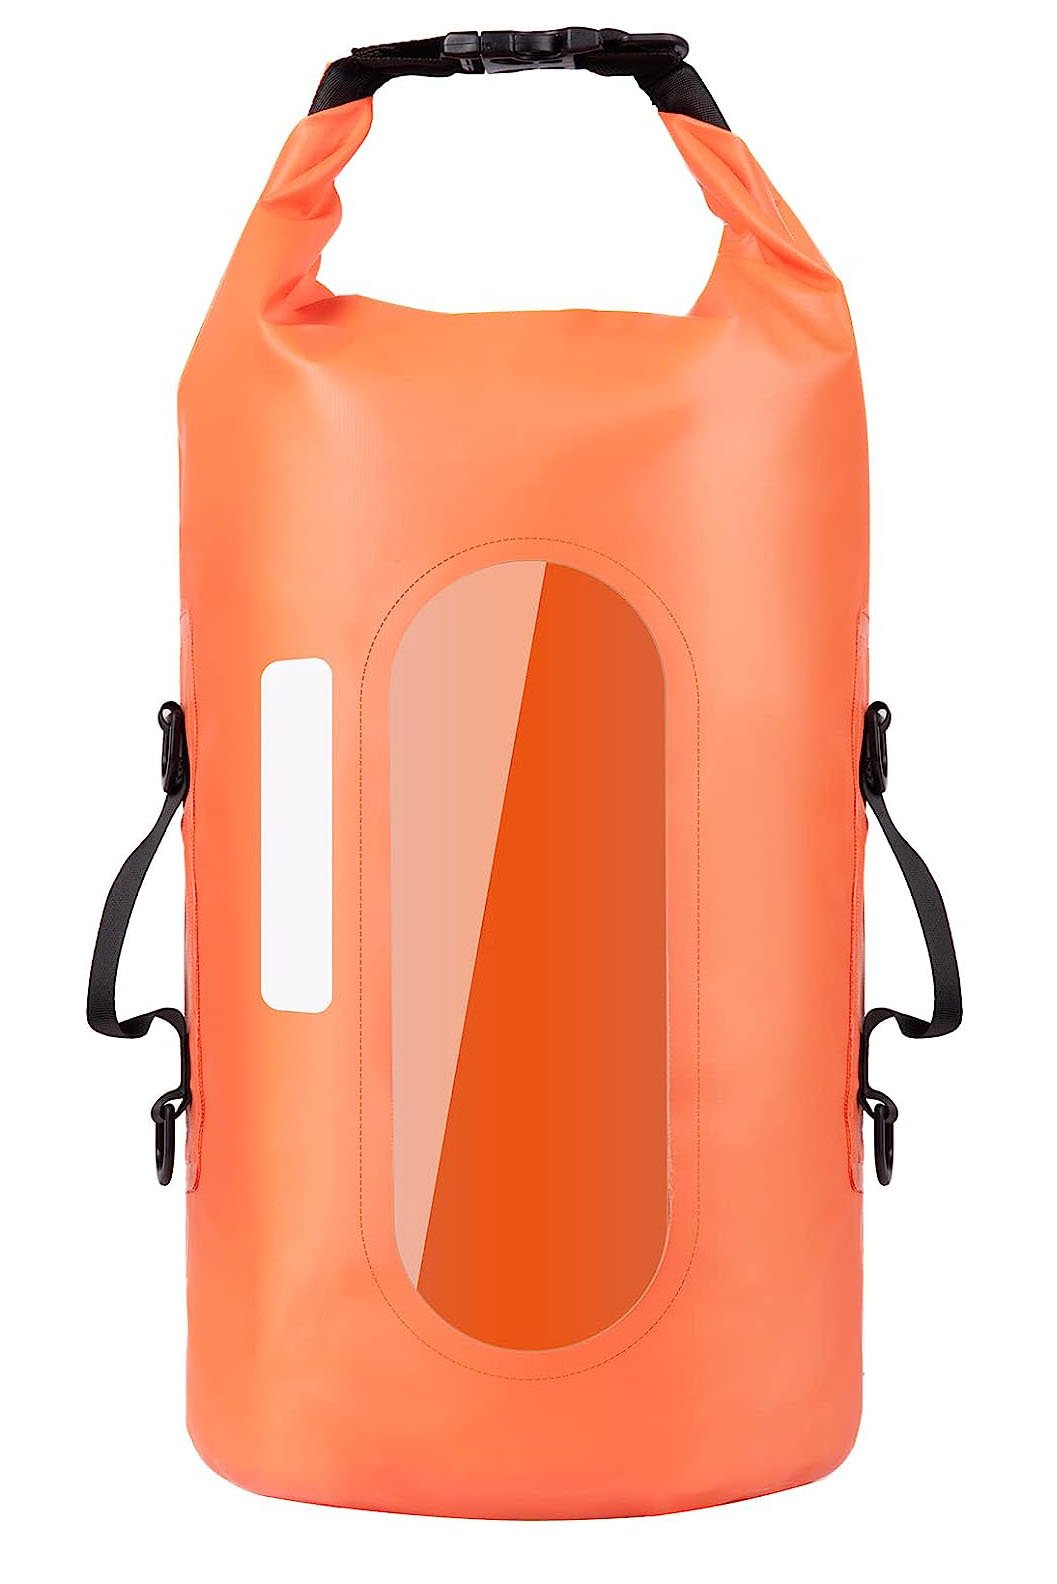 Floating Waterproof Dry Bag with Clear Window Roll Top Lightweight Dry Bag for Camping